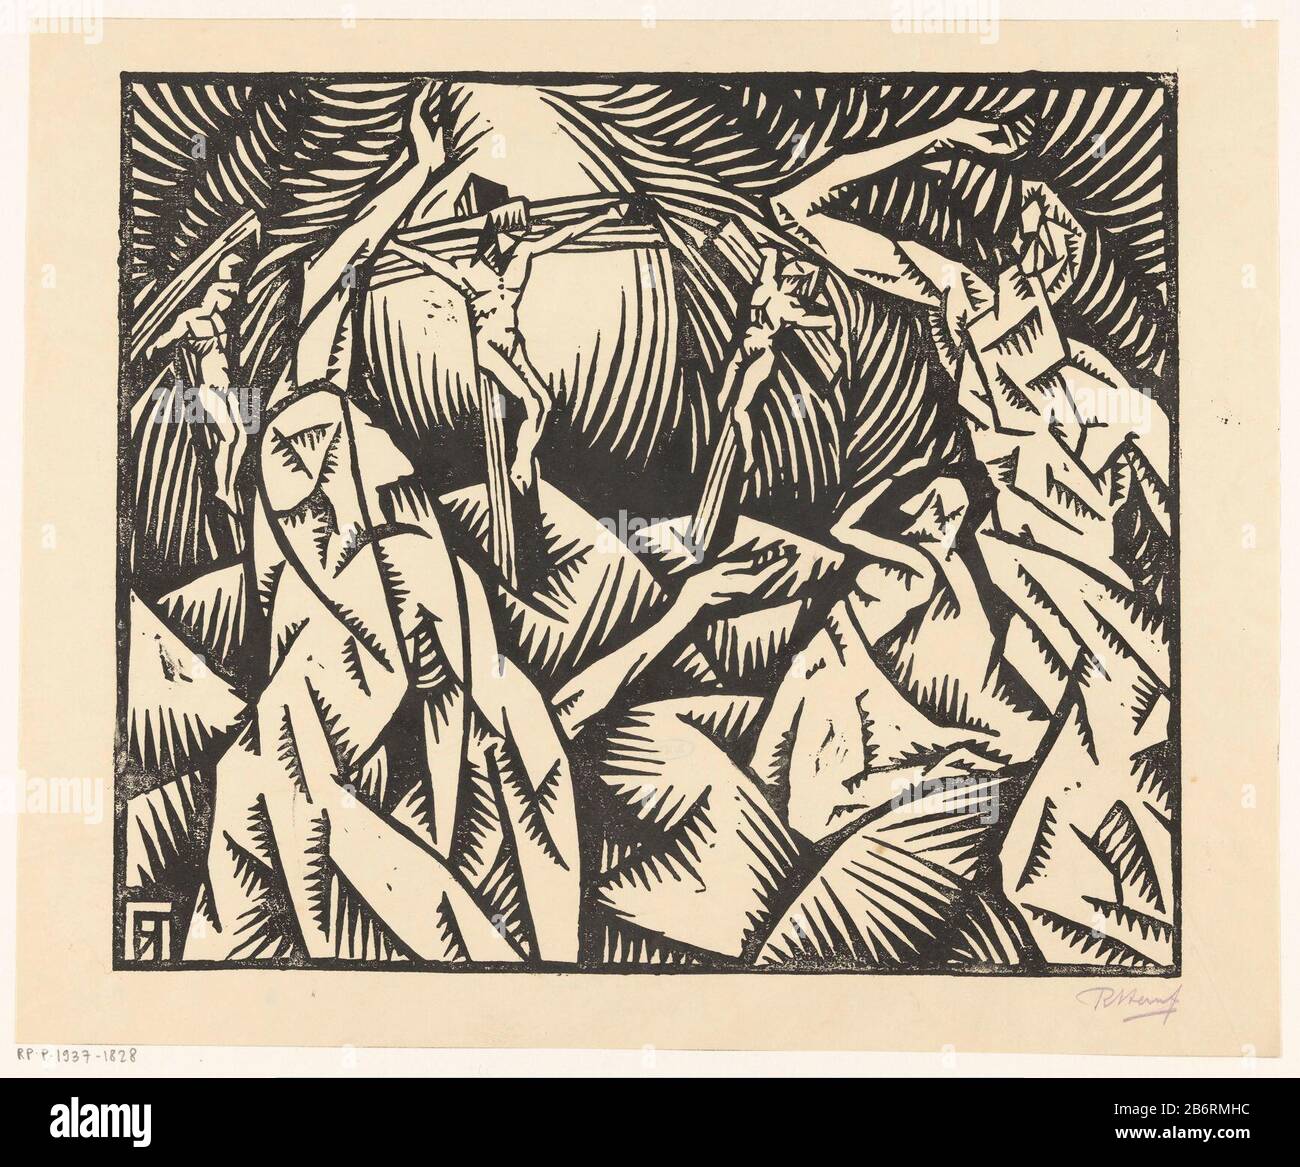 Golgotha (originele titel op object) Hill Calvary with Christ and the two criminals on the cross. For those two Marys and a bearded man. Manufacturer : printmaker Bob Hanf (personally signed) Date: 1904 - 1937 Material: paper Technique: woodcut Dimensions: sheet: H 347 mm × W 425 mm Subject: the crucifixion of Christ: Christ's death on the cross ; Calvary (Matthew 27: 45-58; Mark 15: 33-45; Luke 23: 44-52; John 19: 25-38) Stock Photo